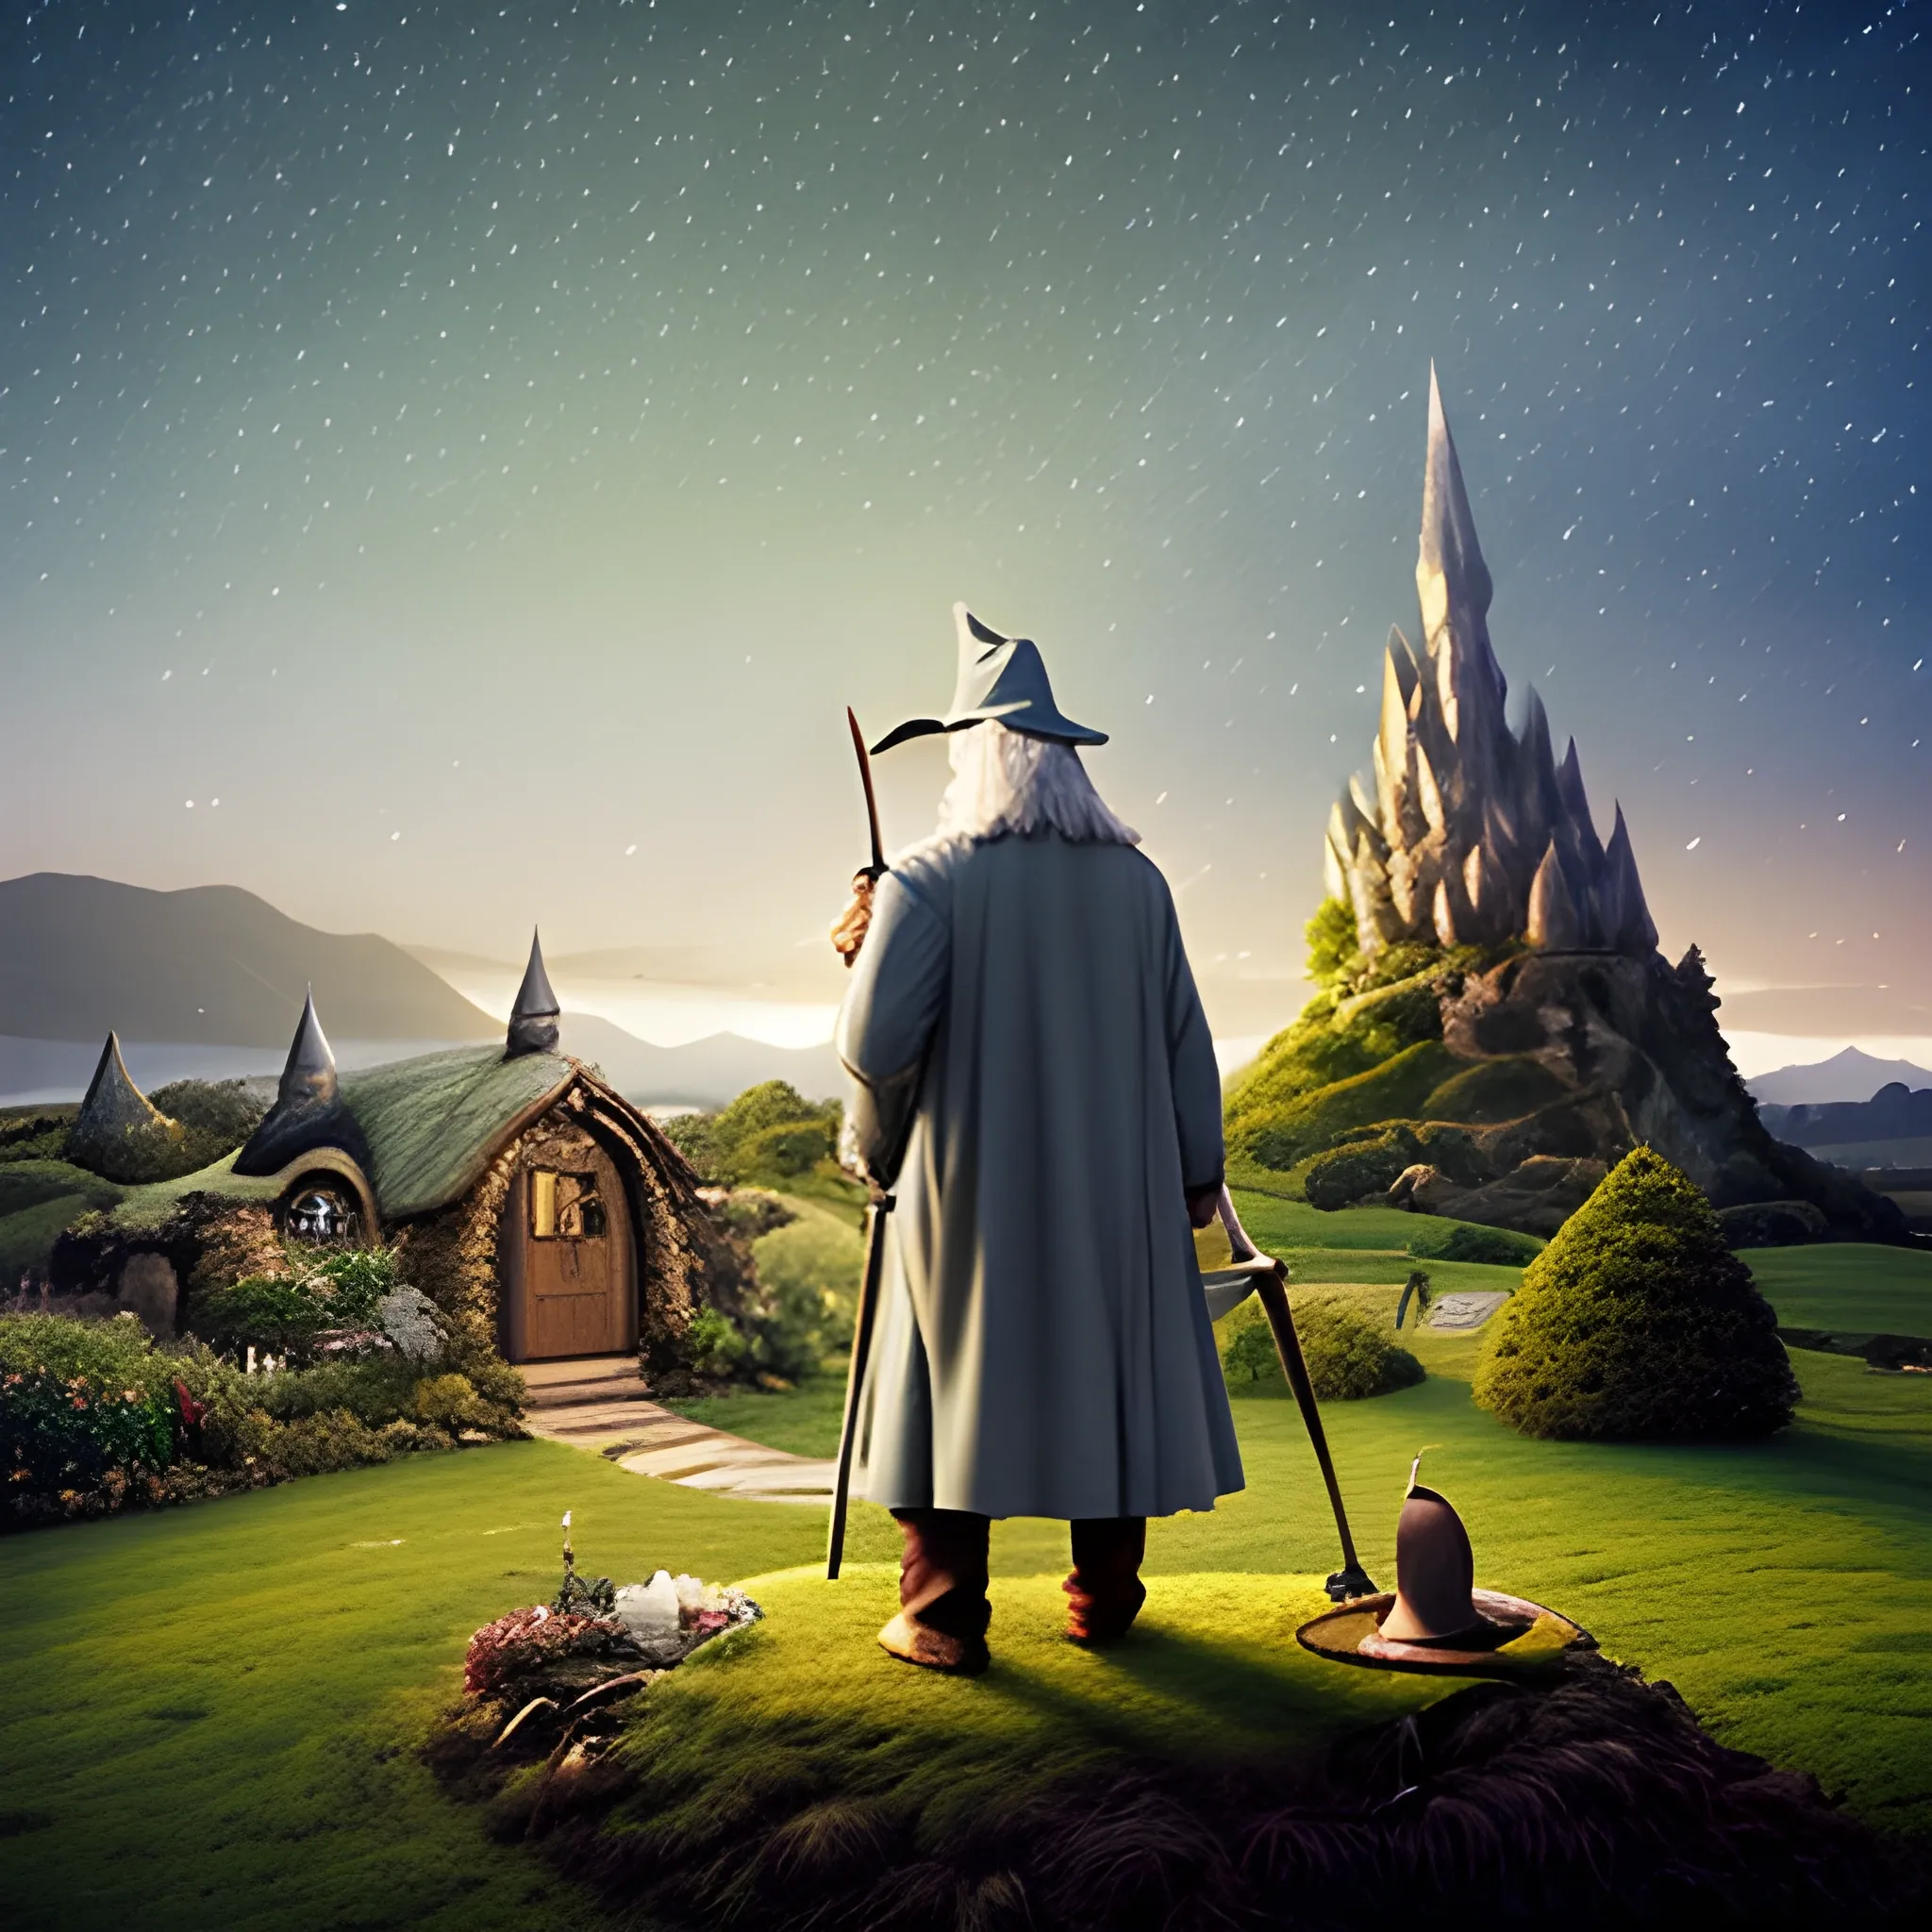 gandalf standing on hill, gandalf with back to tree, gandalf with his wizards hat on, back to camera, smoking pipe, night scene, hobbiton in background, the shire, warmly lit hobbit holes, party tree, celebration, fireworks, 